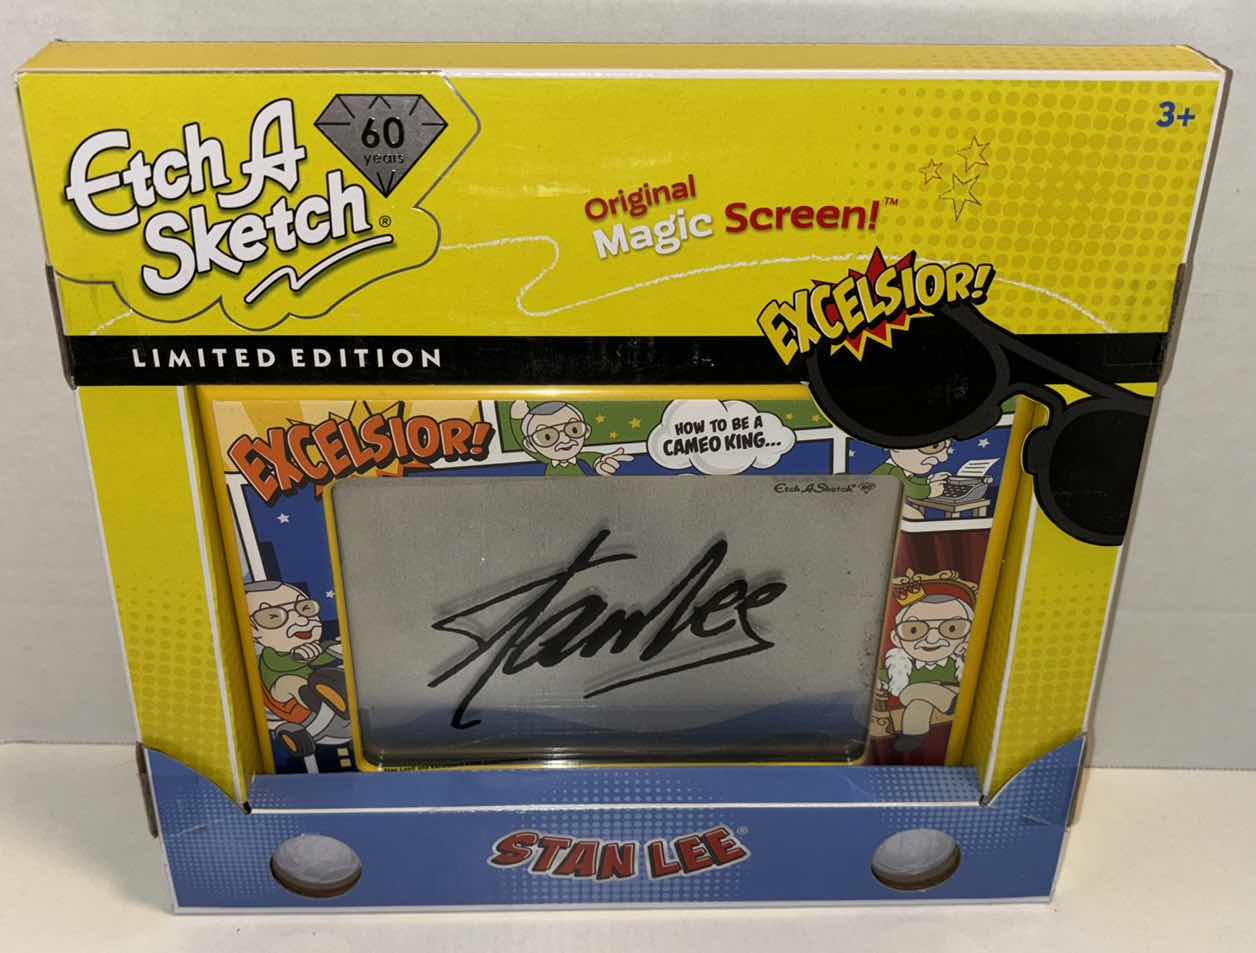 Photo 1 of NEW SPINMASTER ETCH A SKETCH 60 YEARS “STAN LEE” LIMITED EDITION